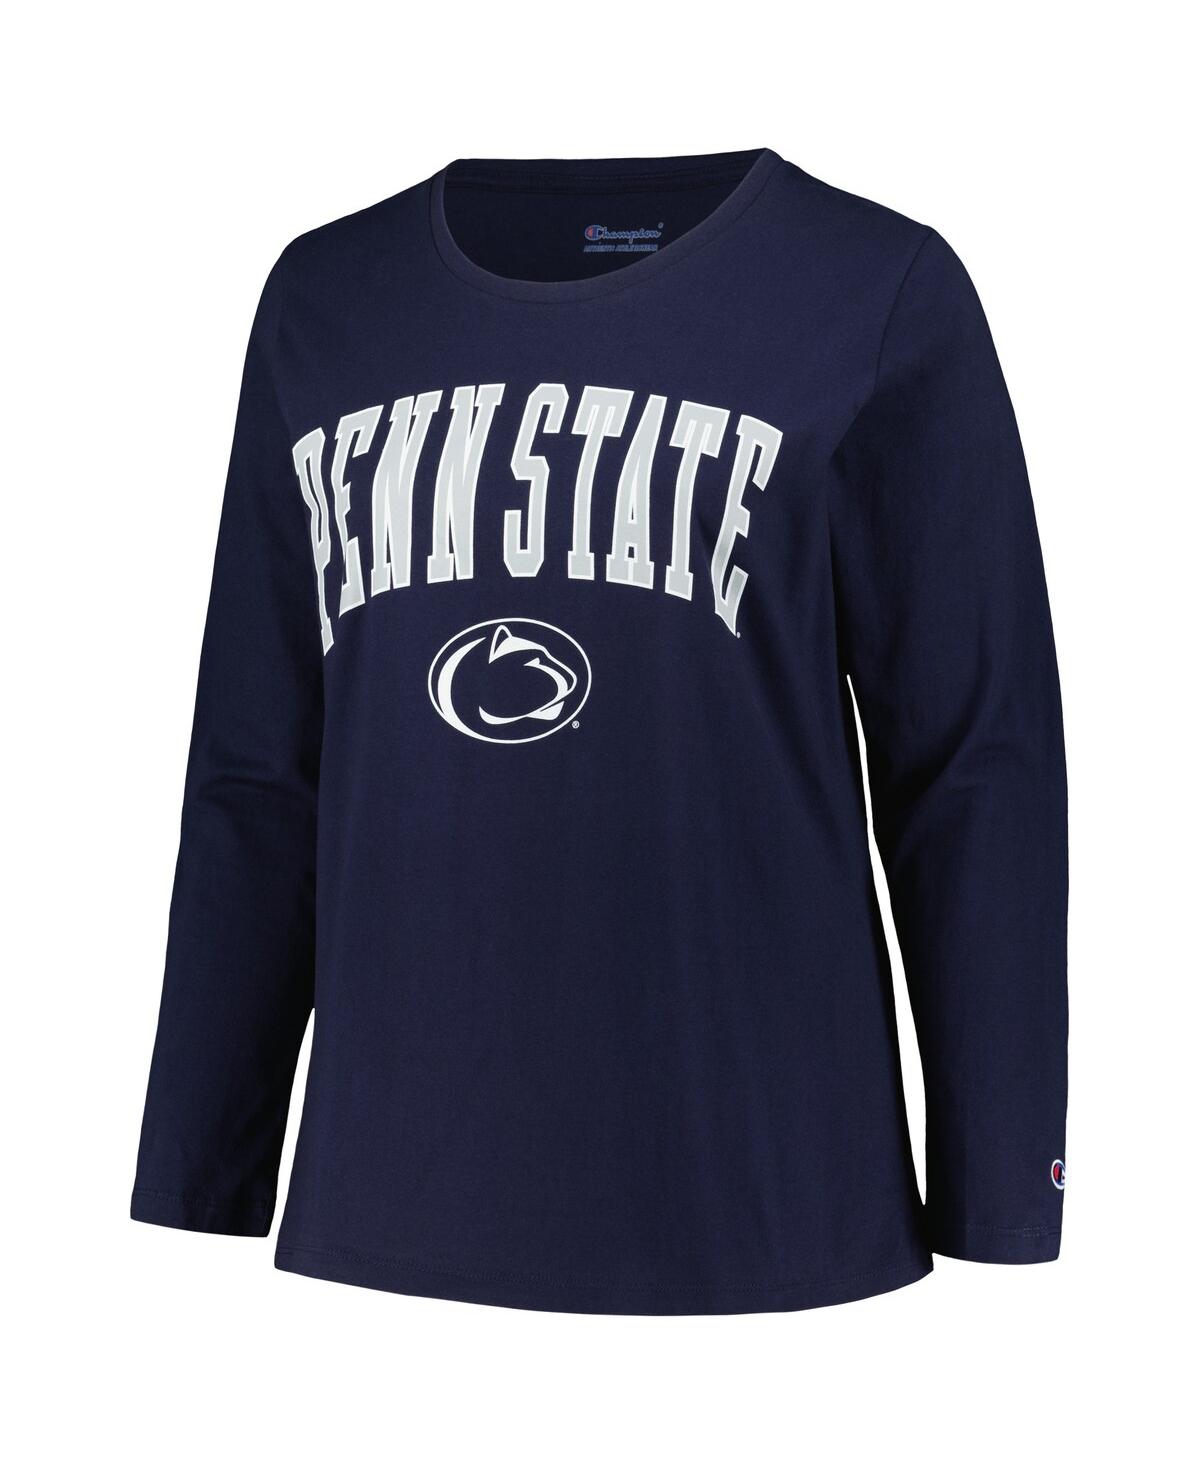 Shop Profile Women's  Navy Penn State Nittany Lions Plus Size Arch Over Logo Scoop Neck Long Sleeve T-shir